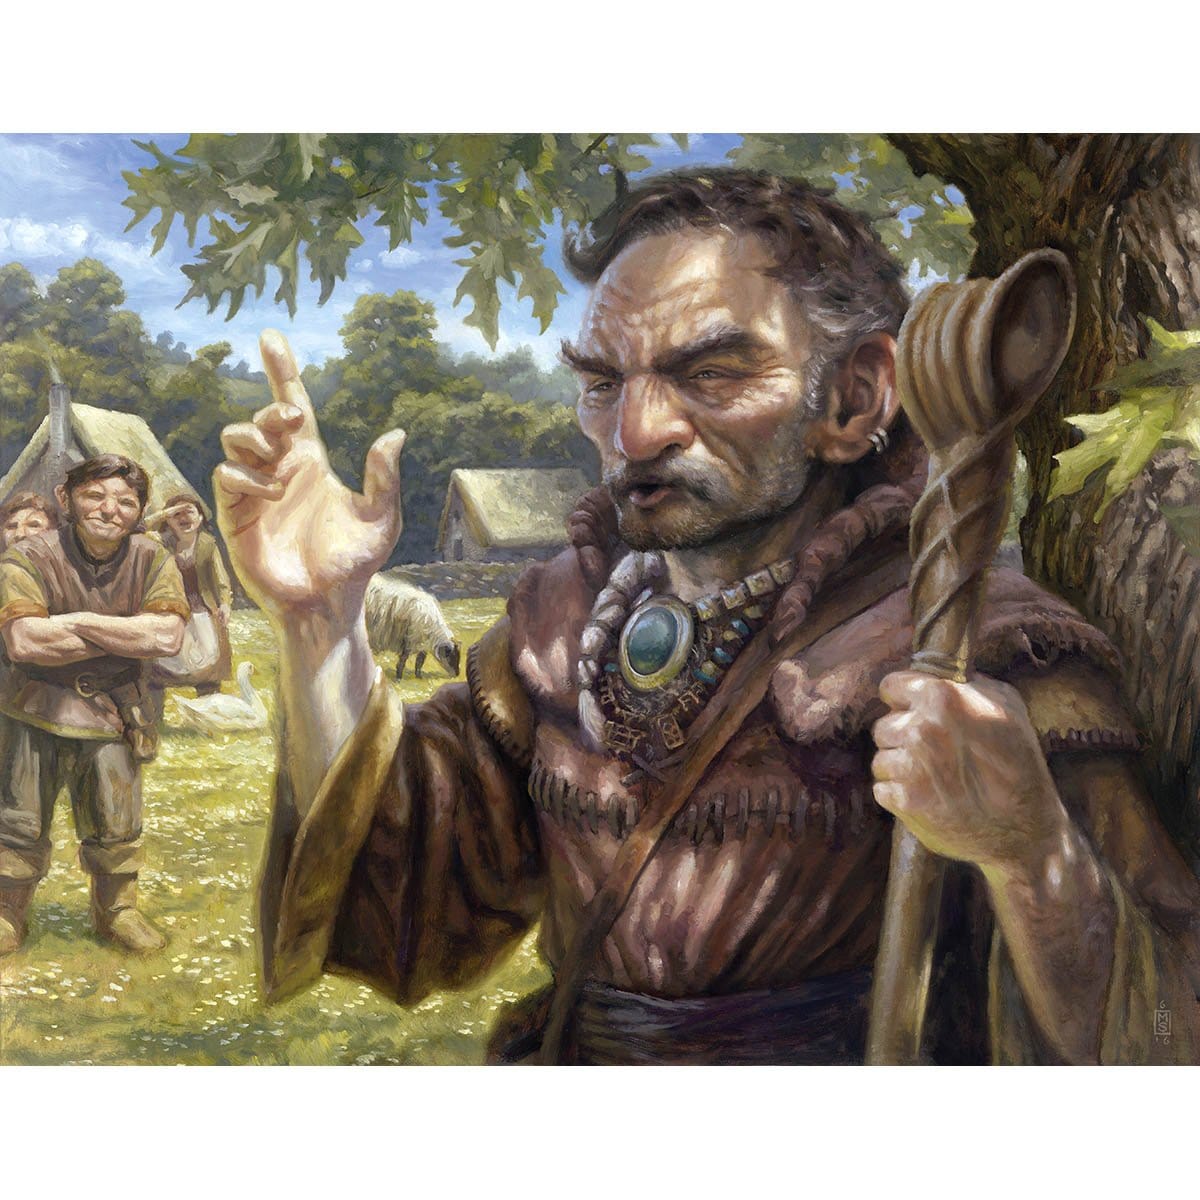 Gaddock Teeg Print - Print - Original Magic Art - Accessories for Magic the Gathering and other card games